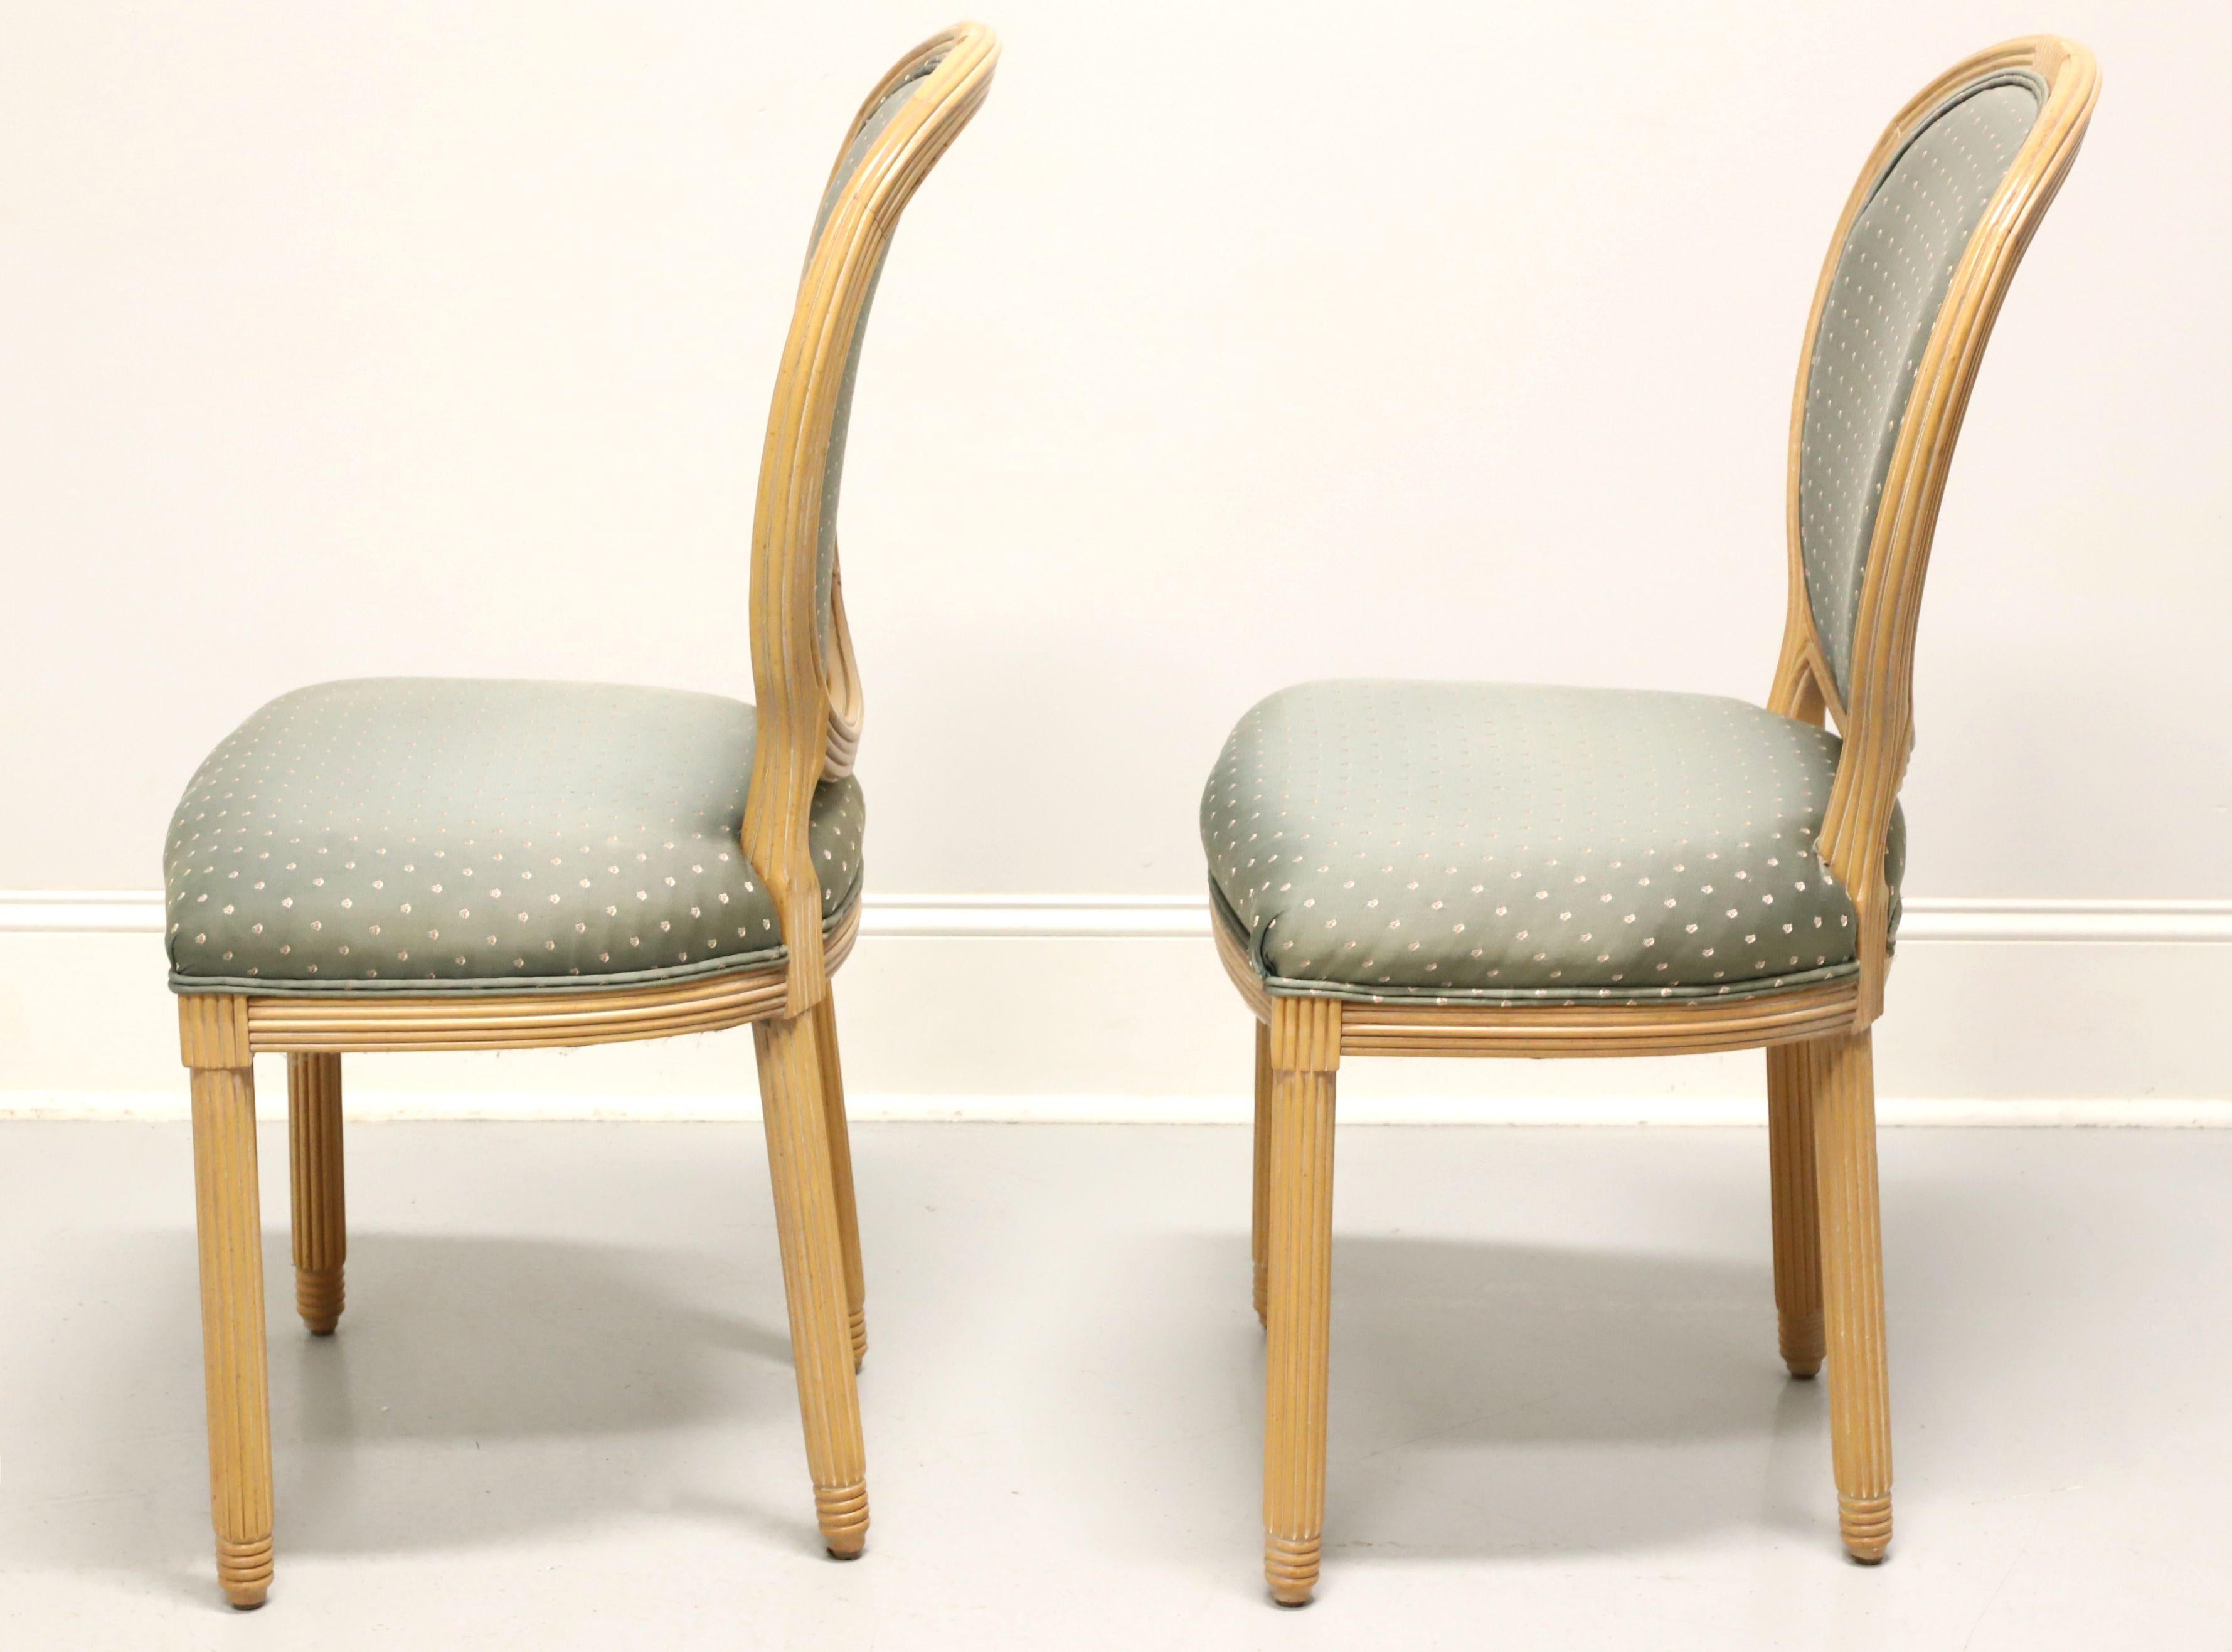 Fabric AMERICAN OF MARTINSVILLE French Provincial Louis XVI Dining Side Chairs - Pair B For Sale